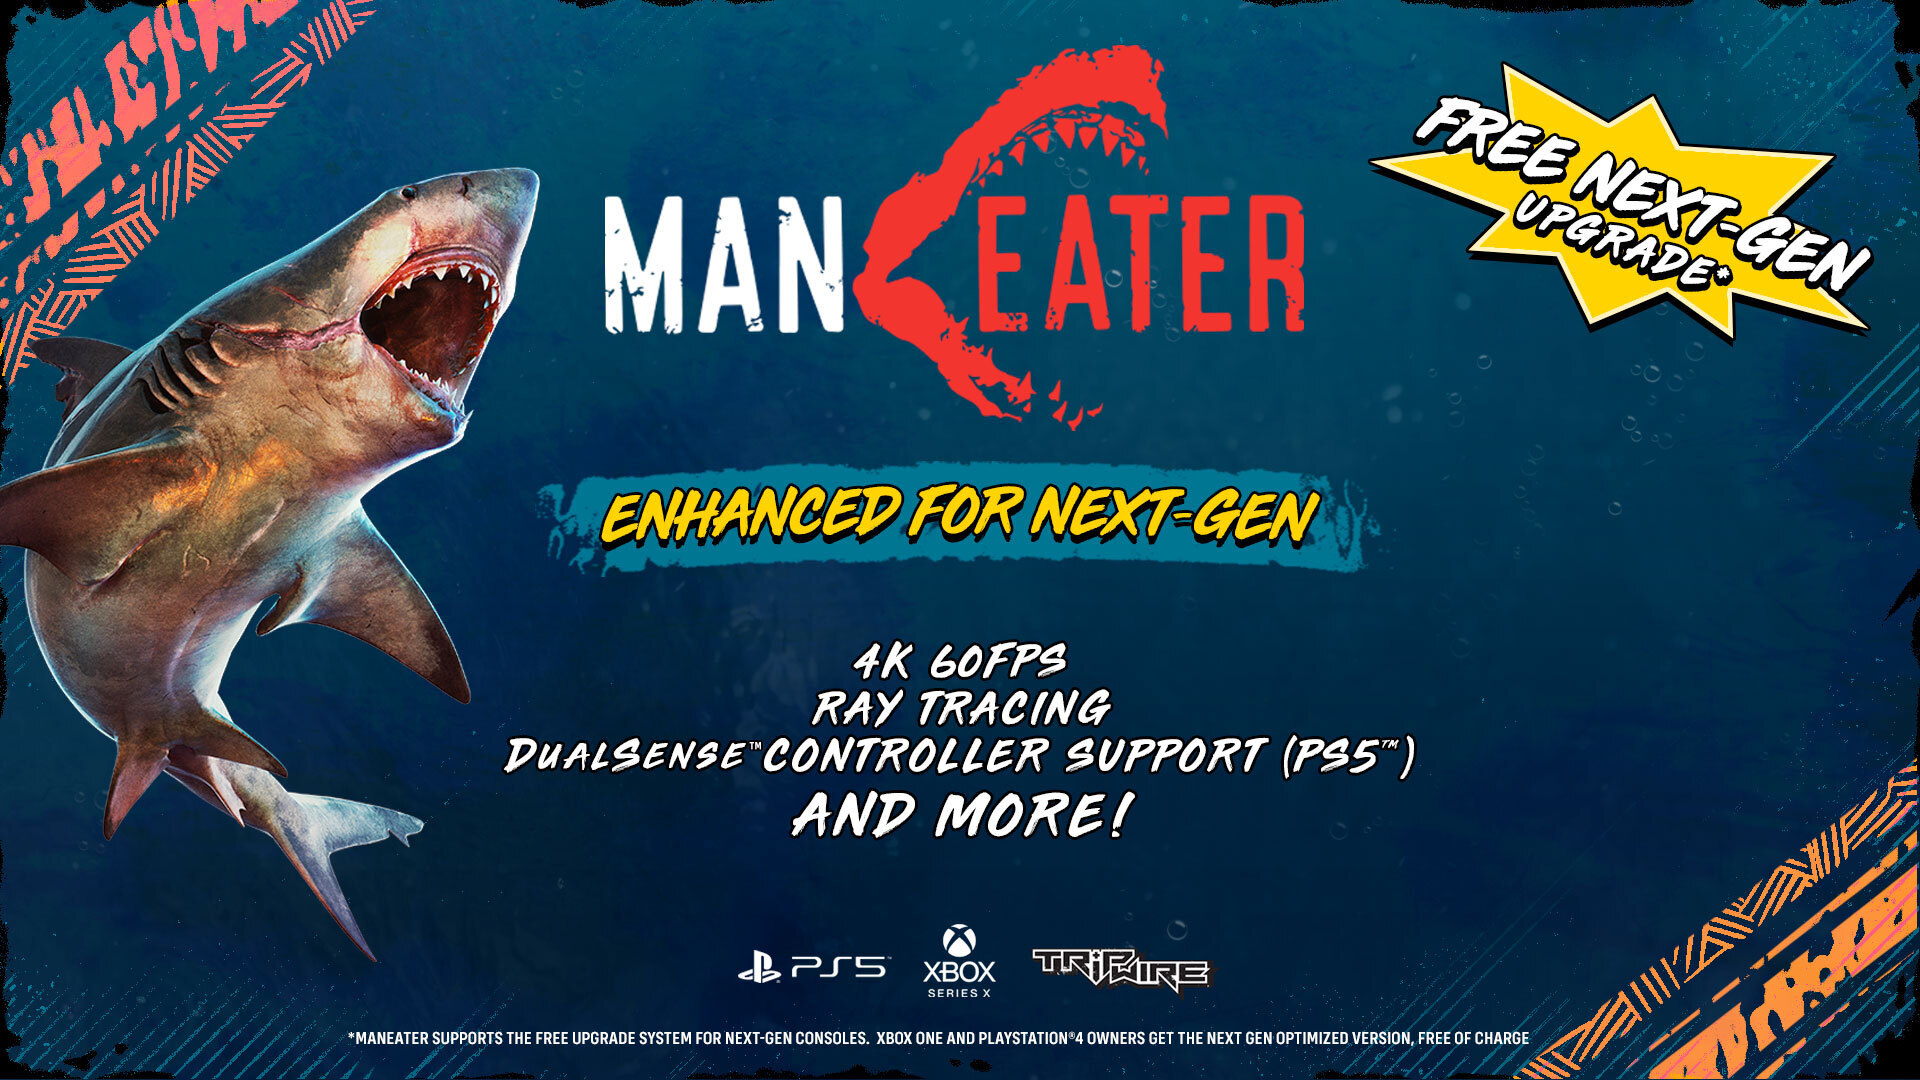 Maneater PS4 & PS5